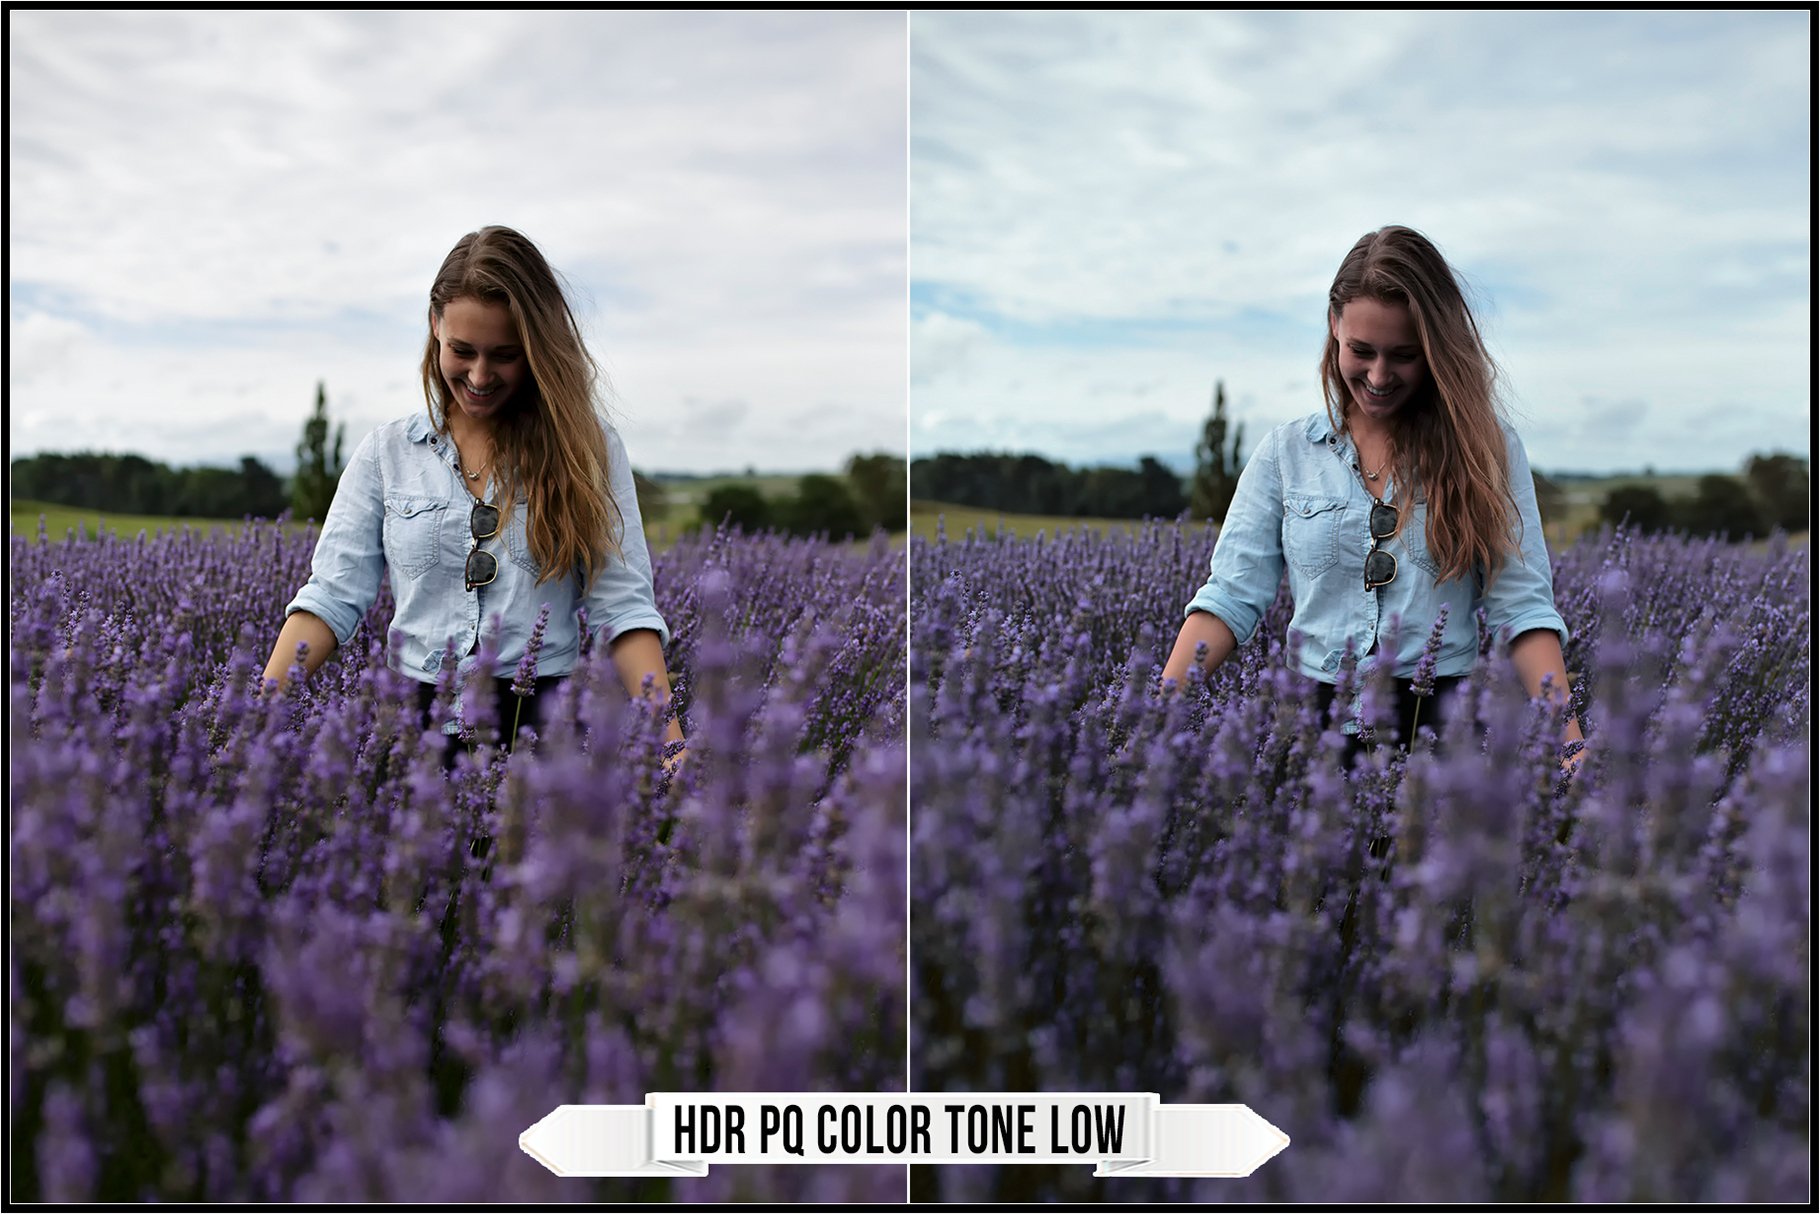 hdr pq color tone low 633